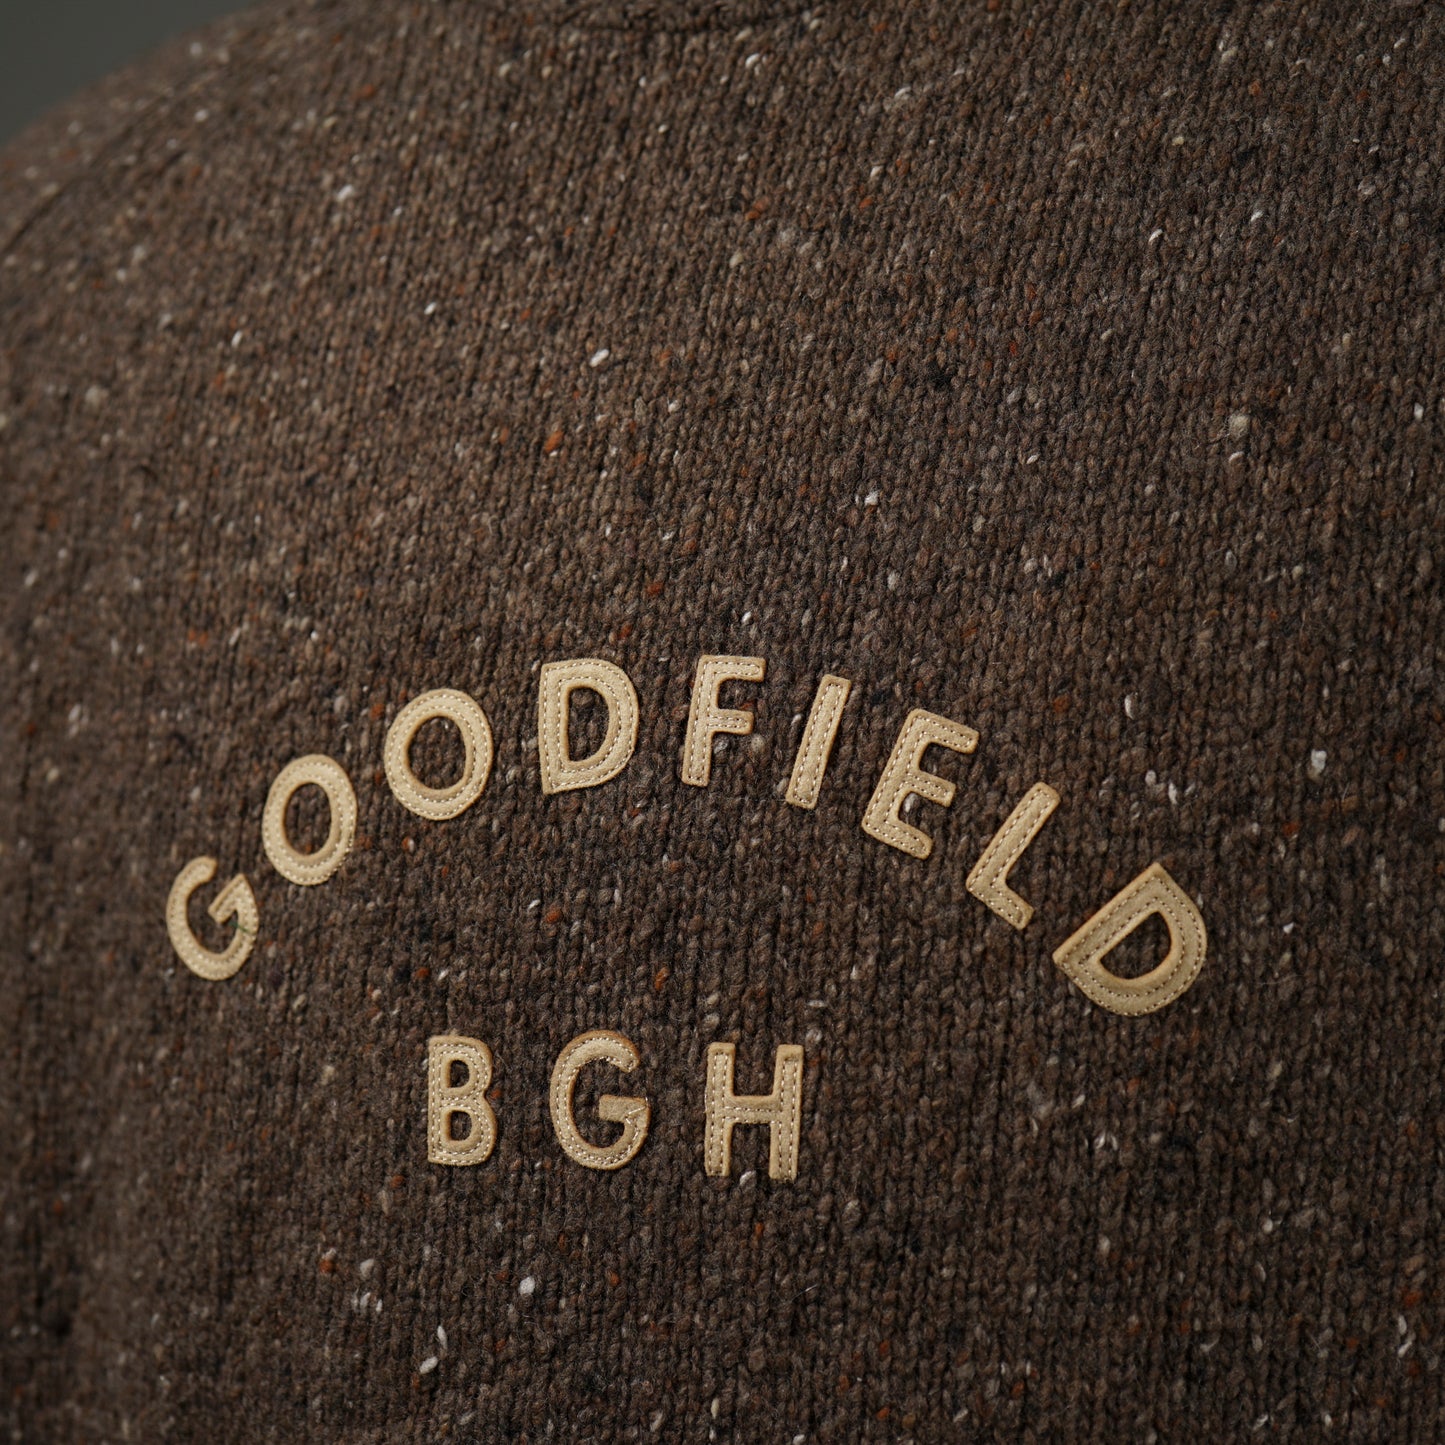 GOODFIELD - NEP TURTLE NECK SWEATER / BYGH-23-AW-15